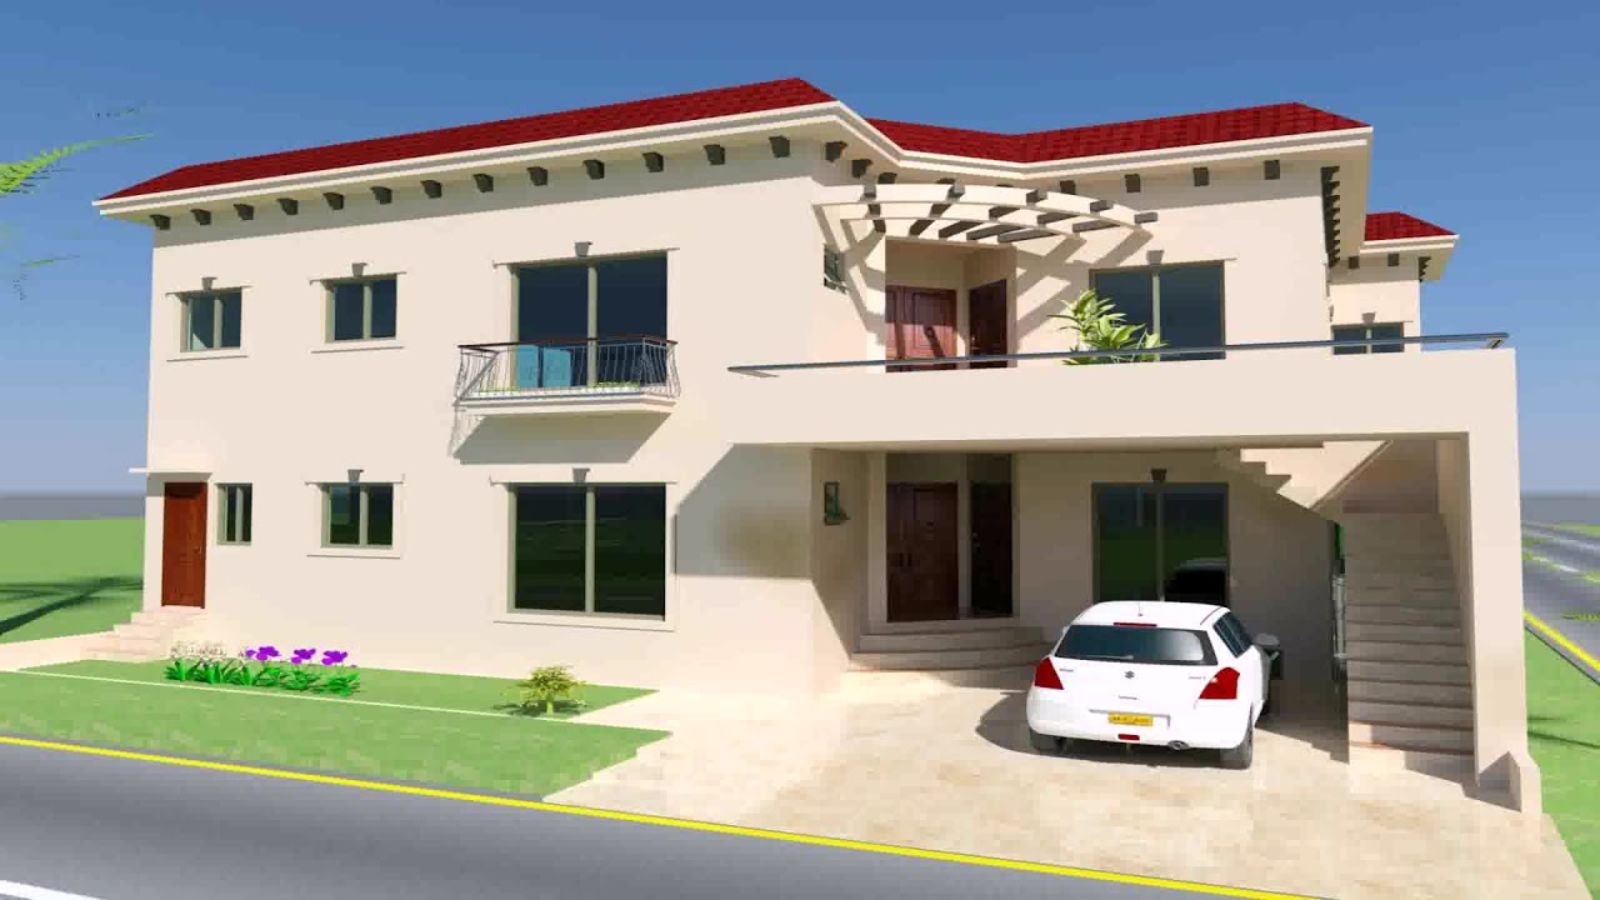 10 Marla House Plan and Design in Pakistan